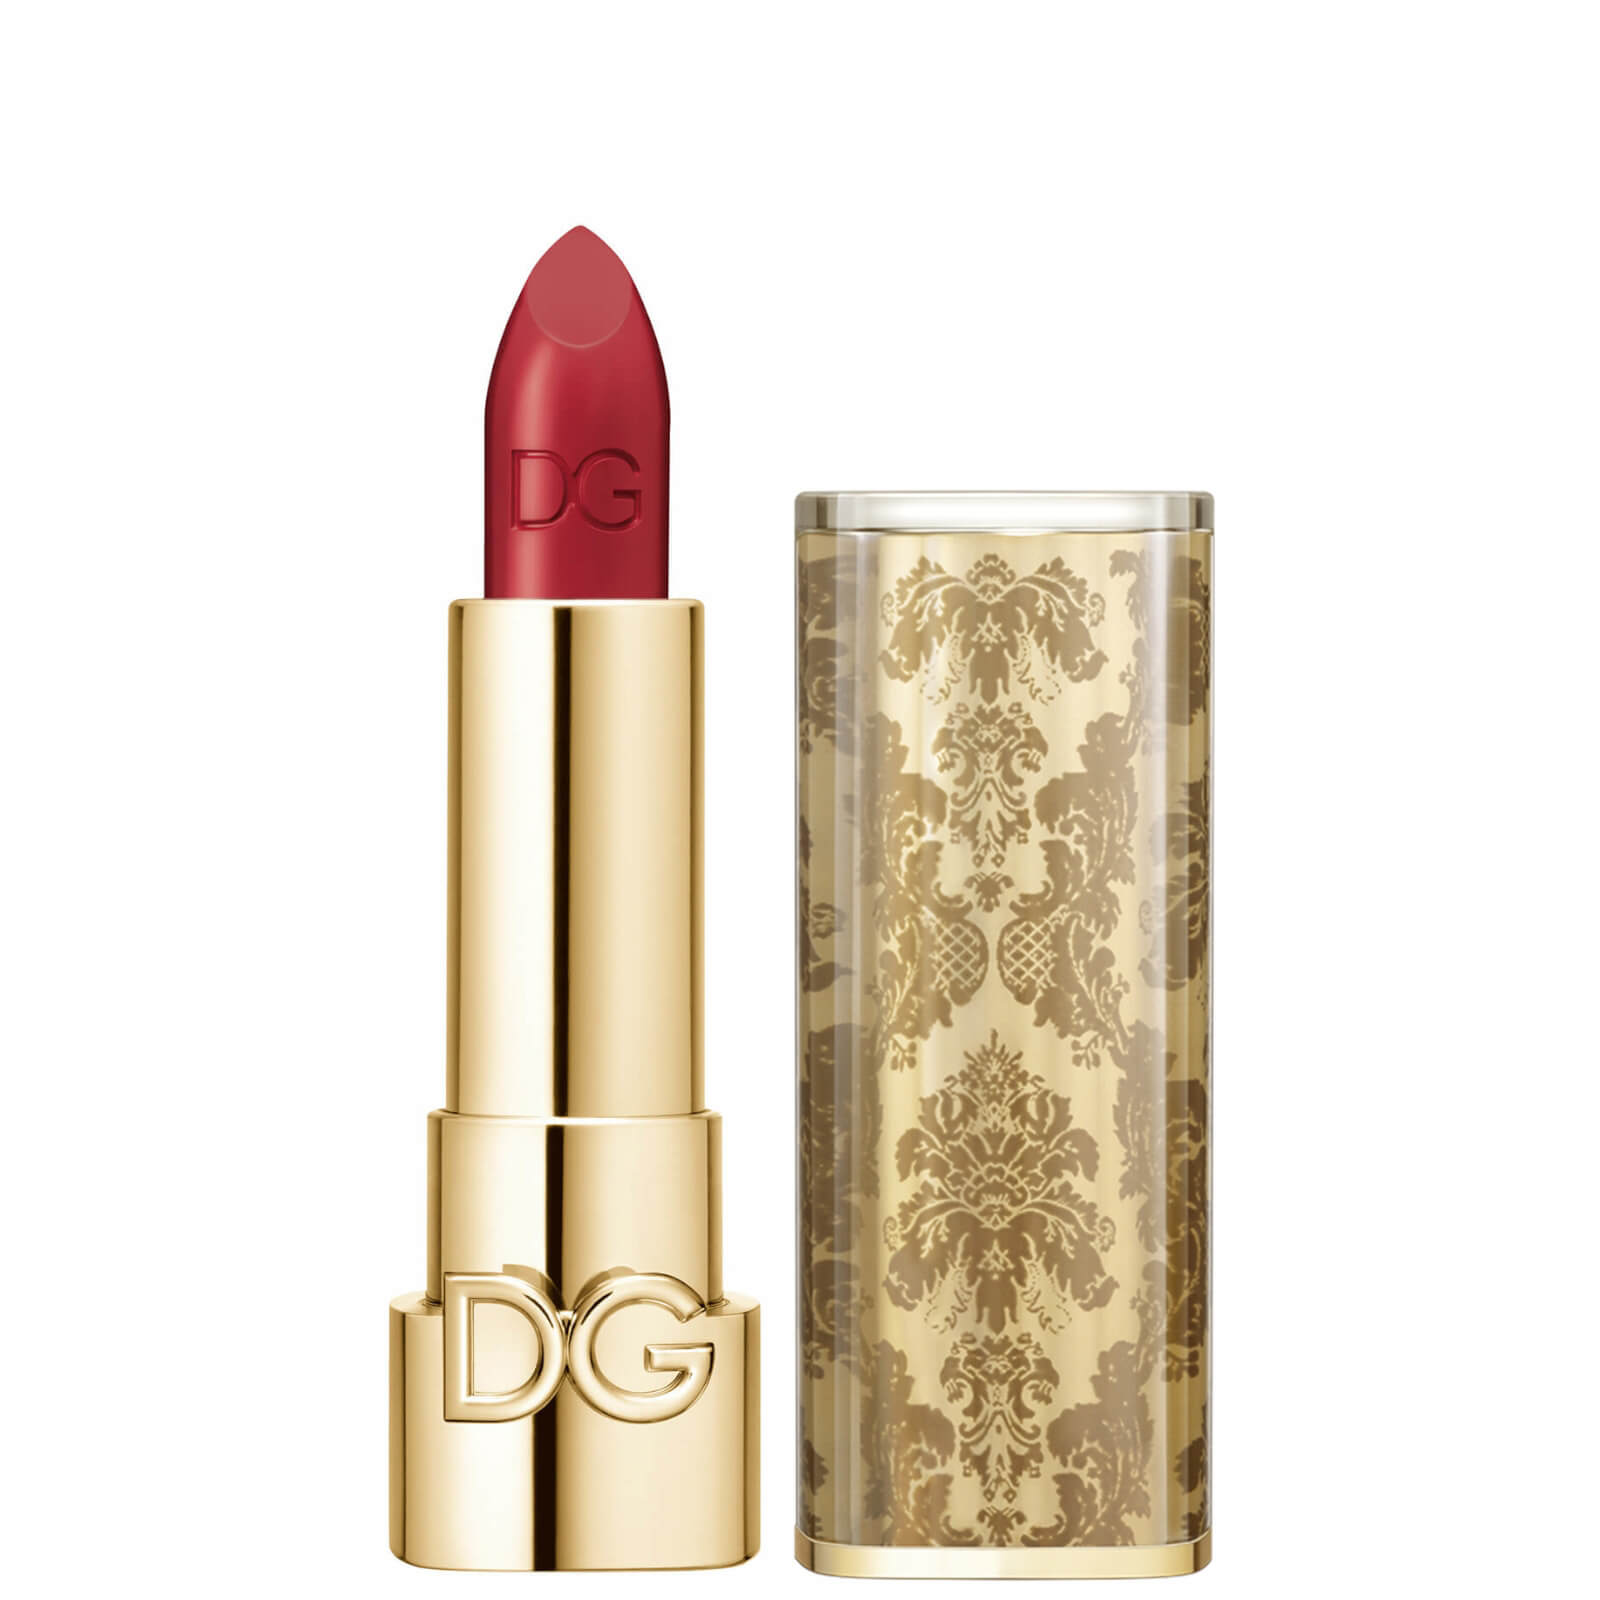 Dolce&Gabbana The Only One Lipstick + Cap (Damasco) (Various Shades) - 650 Iconic Ruby